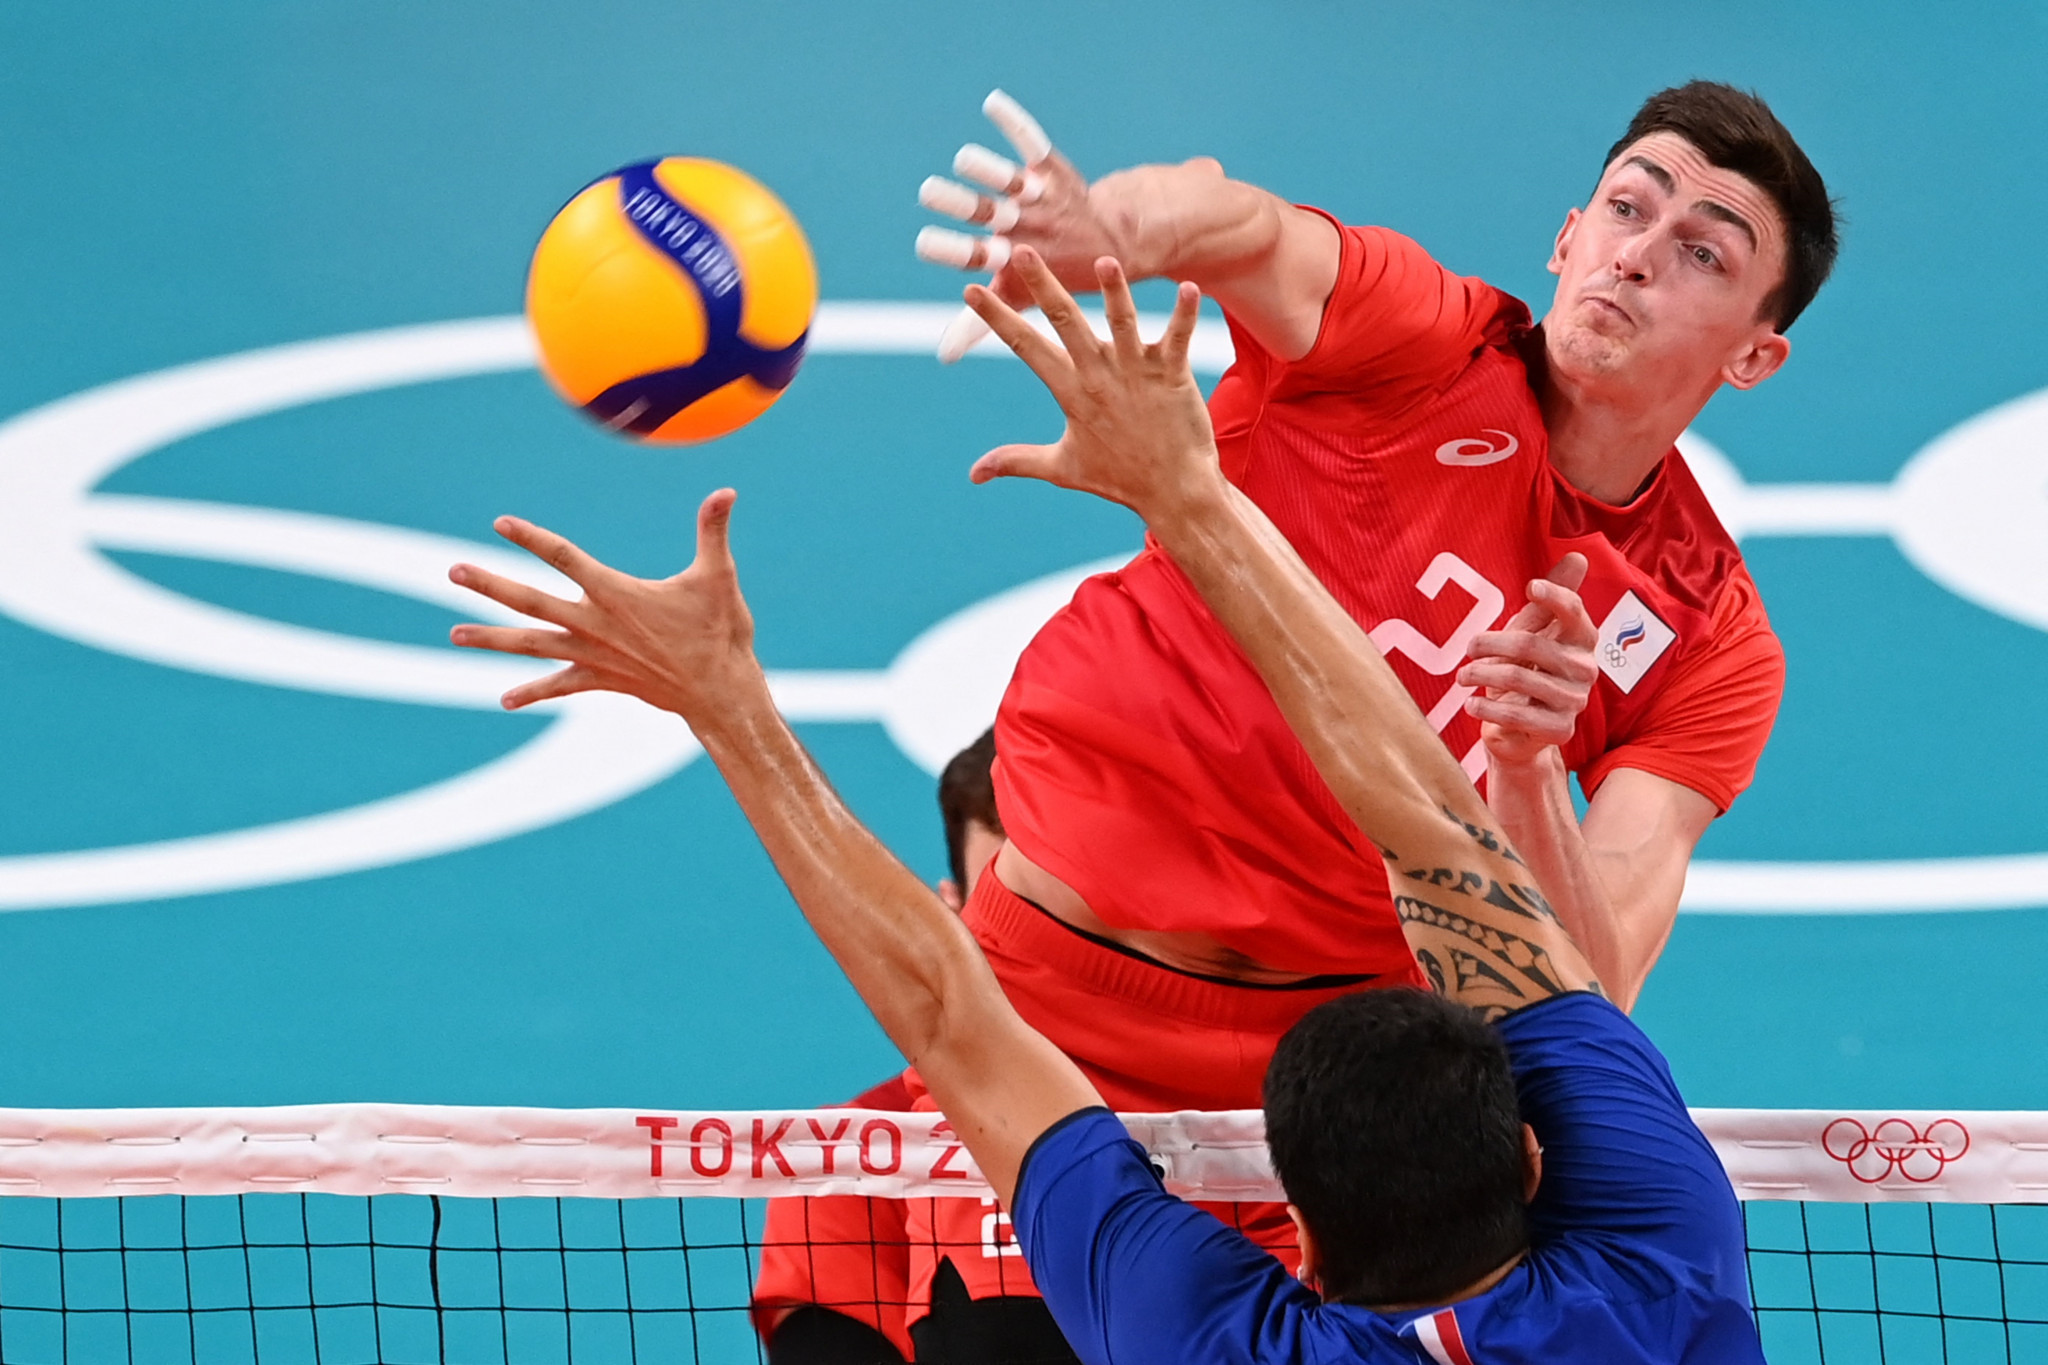 FIVB yet to make call on stripping Russia of 2022 FIVB Men's World  Championship